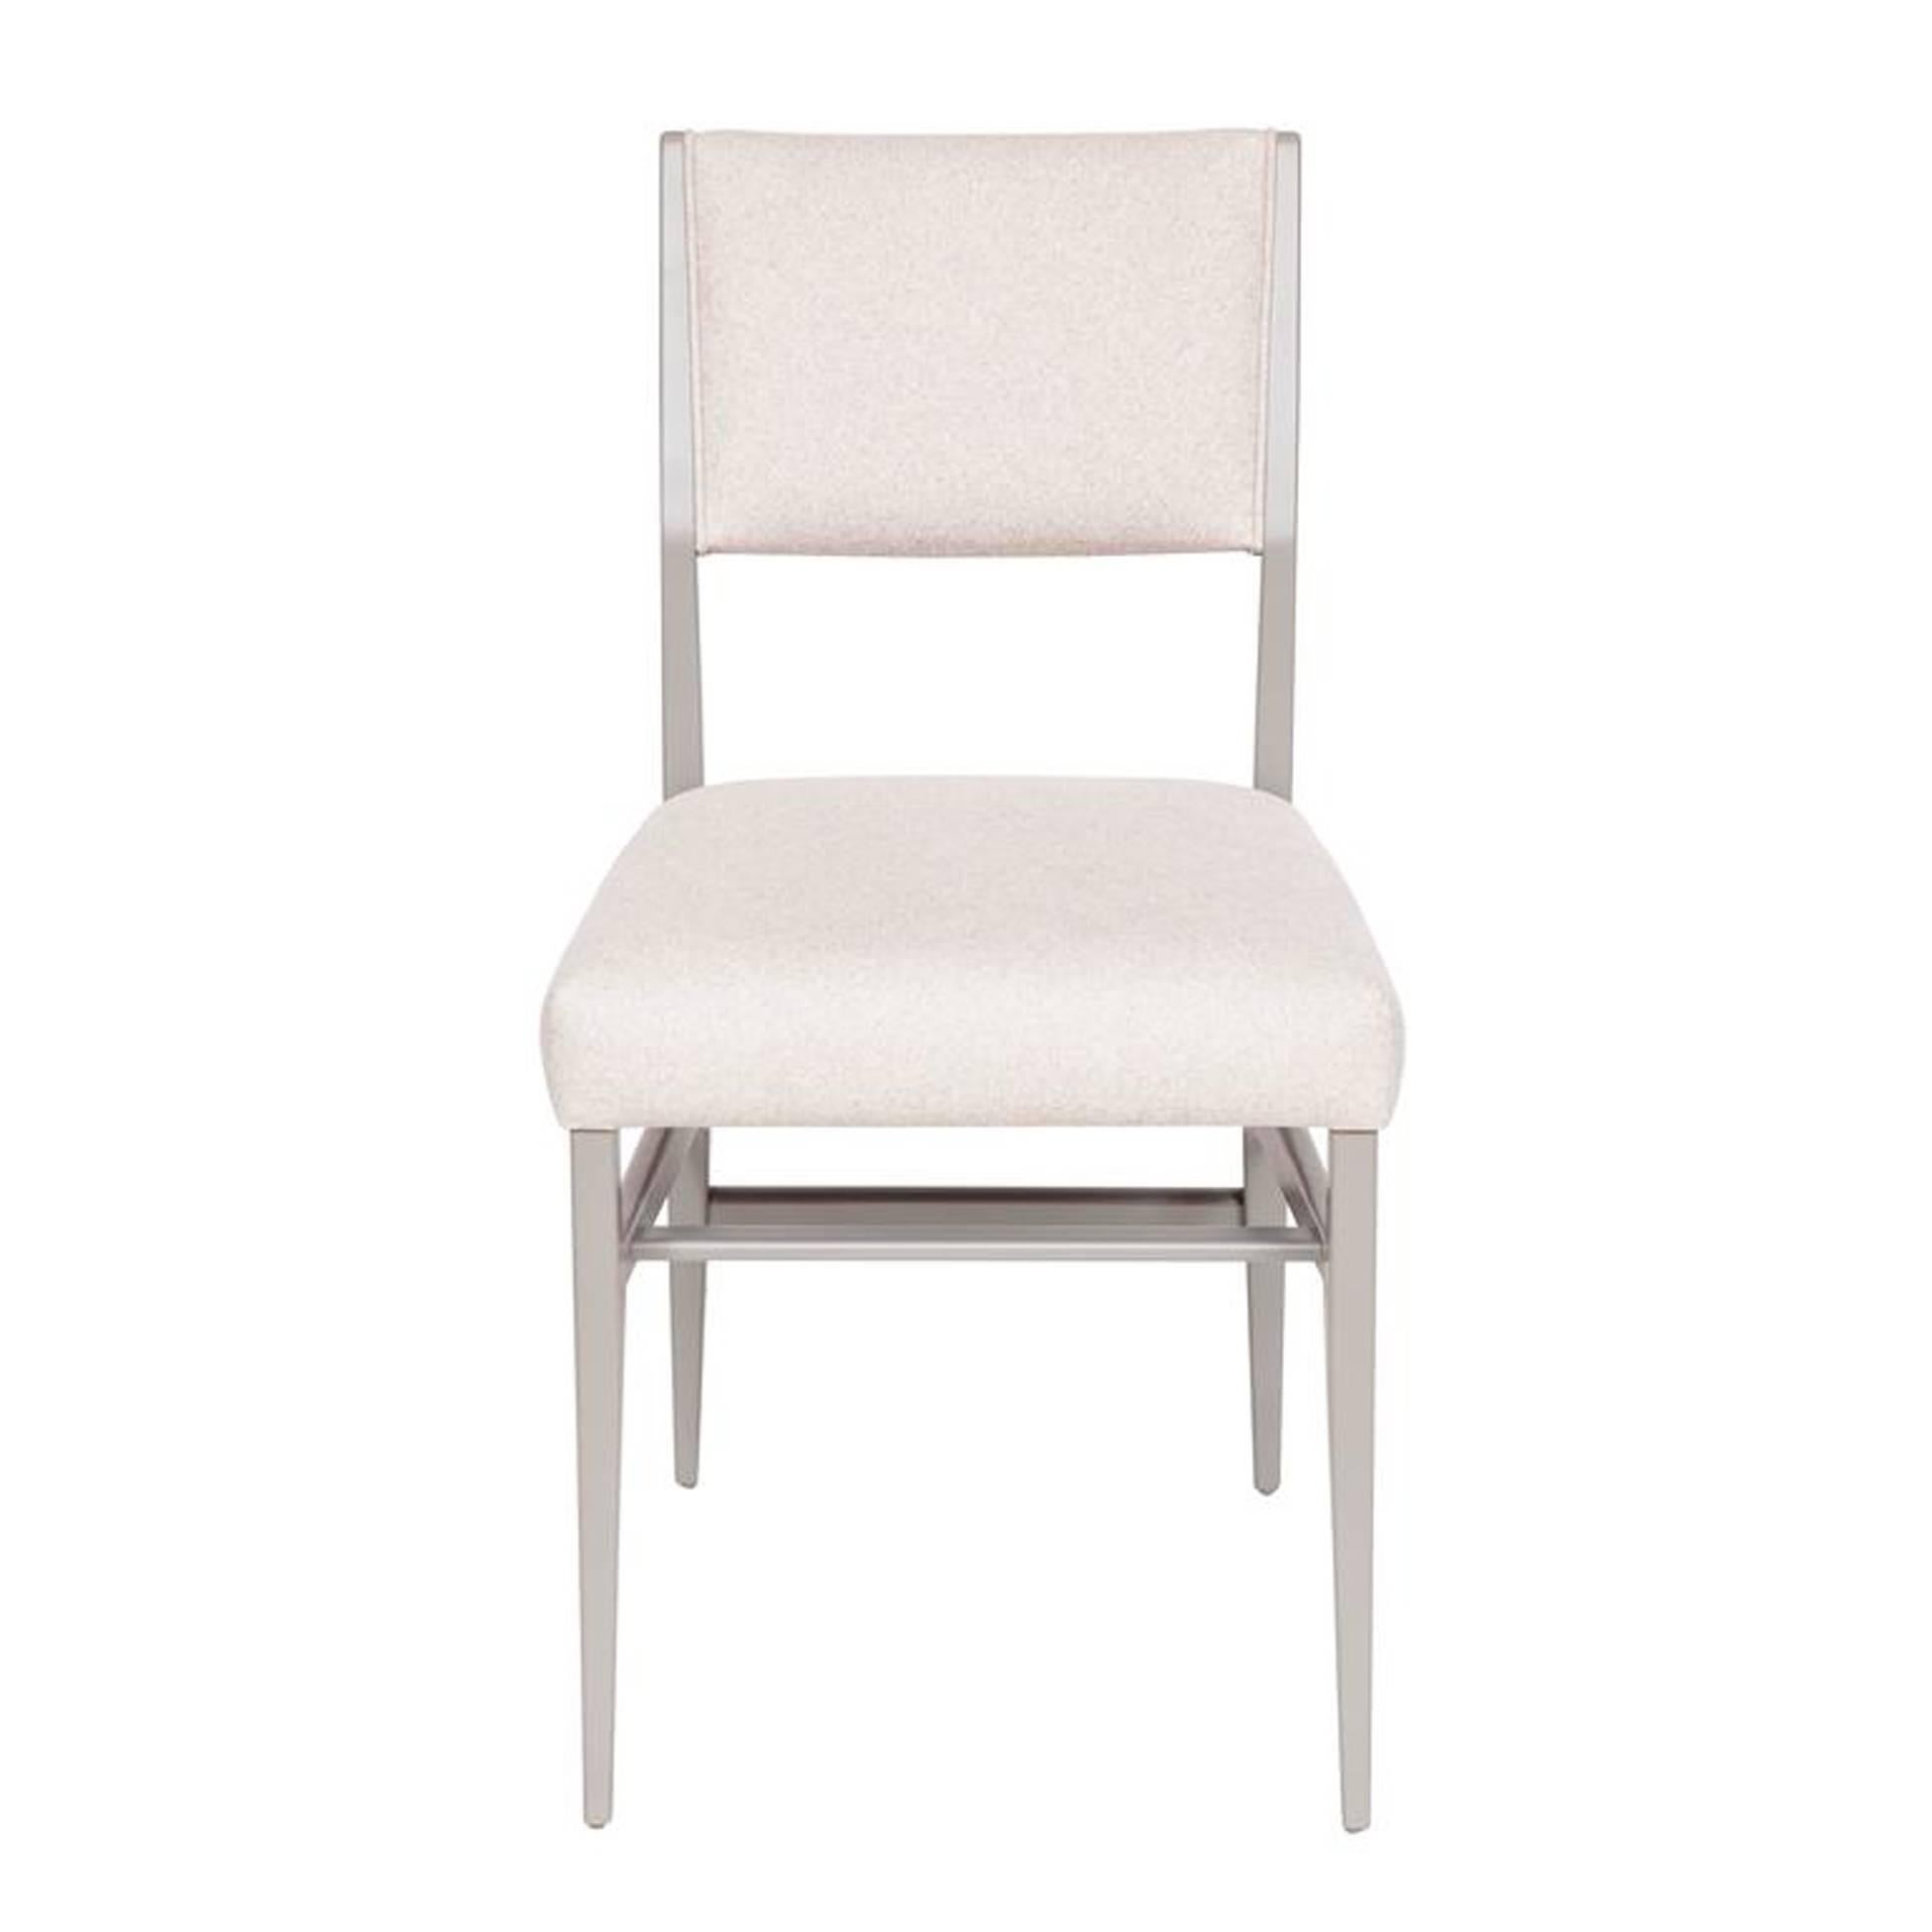 Lacquered dining chair.

Measures: Seat height 19”, 
seat depth 17”. 
COM requirements: 1.5 yards 
5% up-charge for contrasting fabrics and or welting 
COL Requirements: 30 sq. feet 
5% percentage up-charge for all COL or exotic